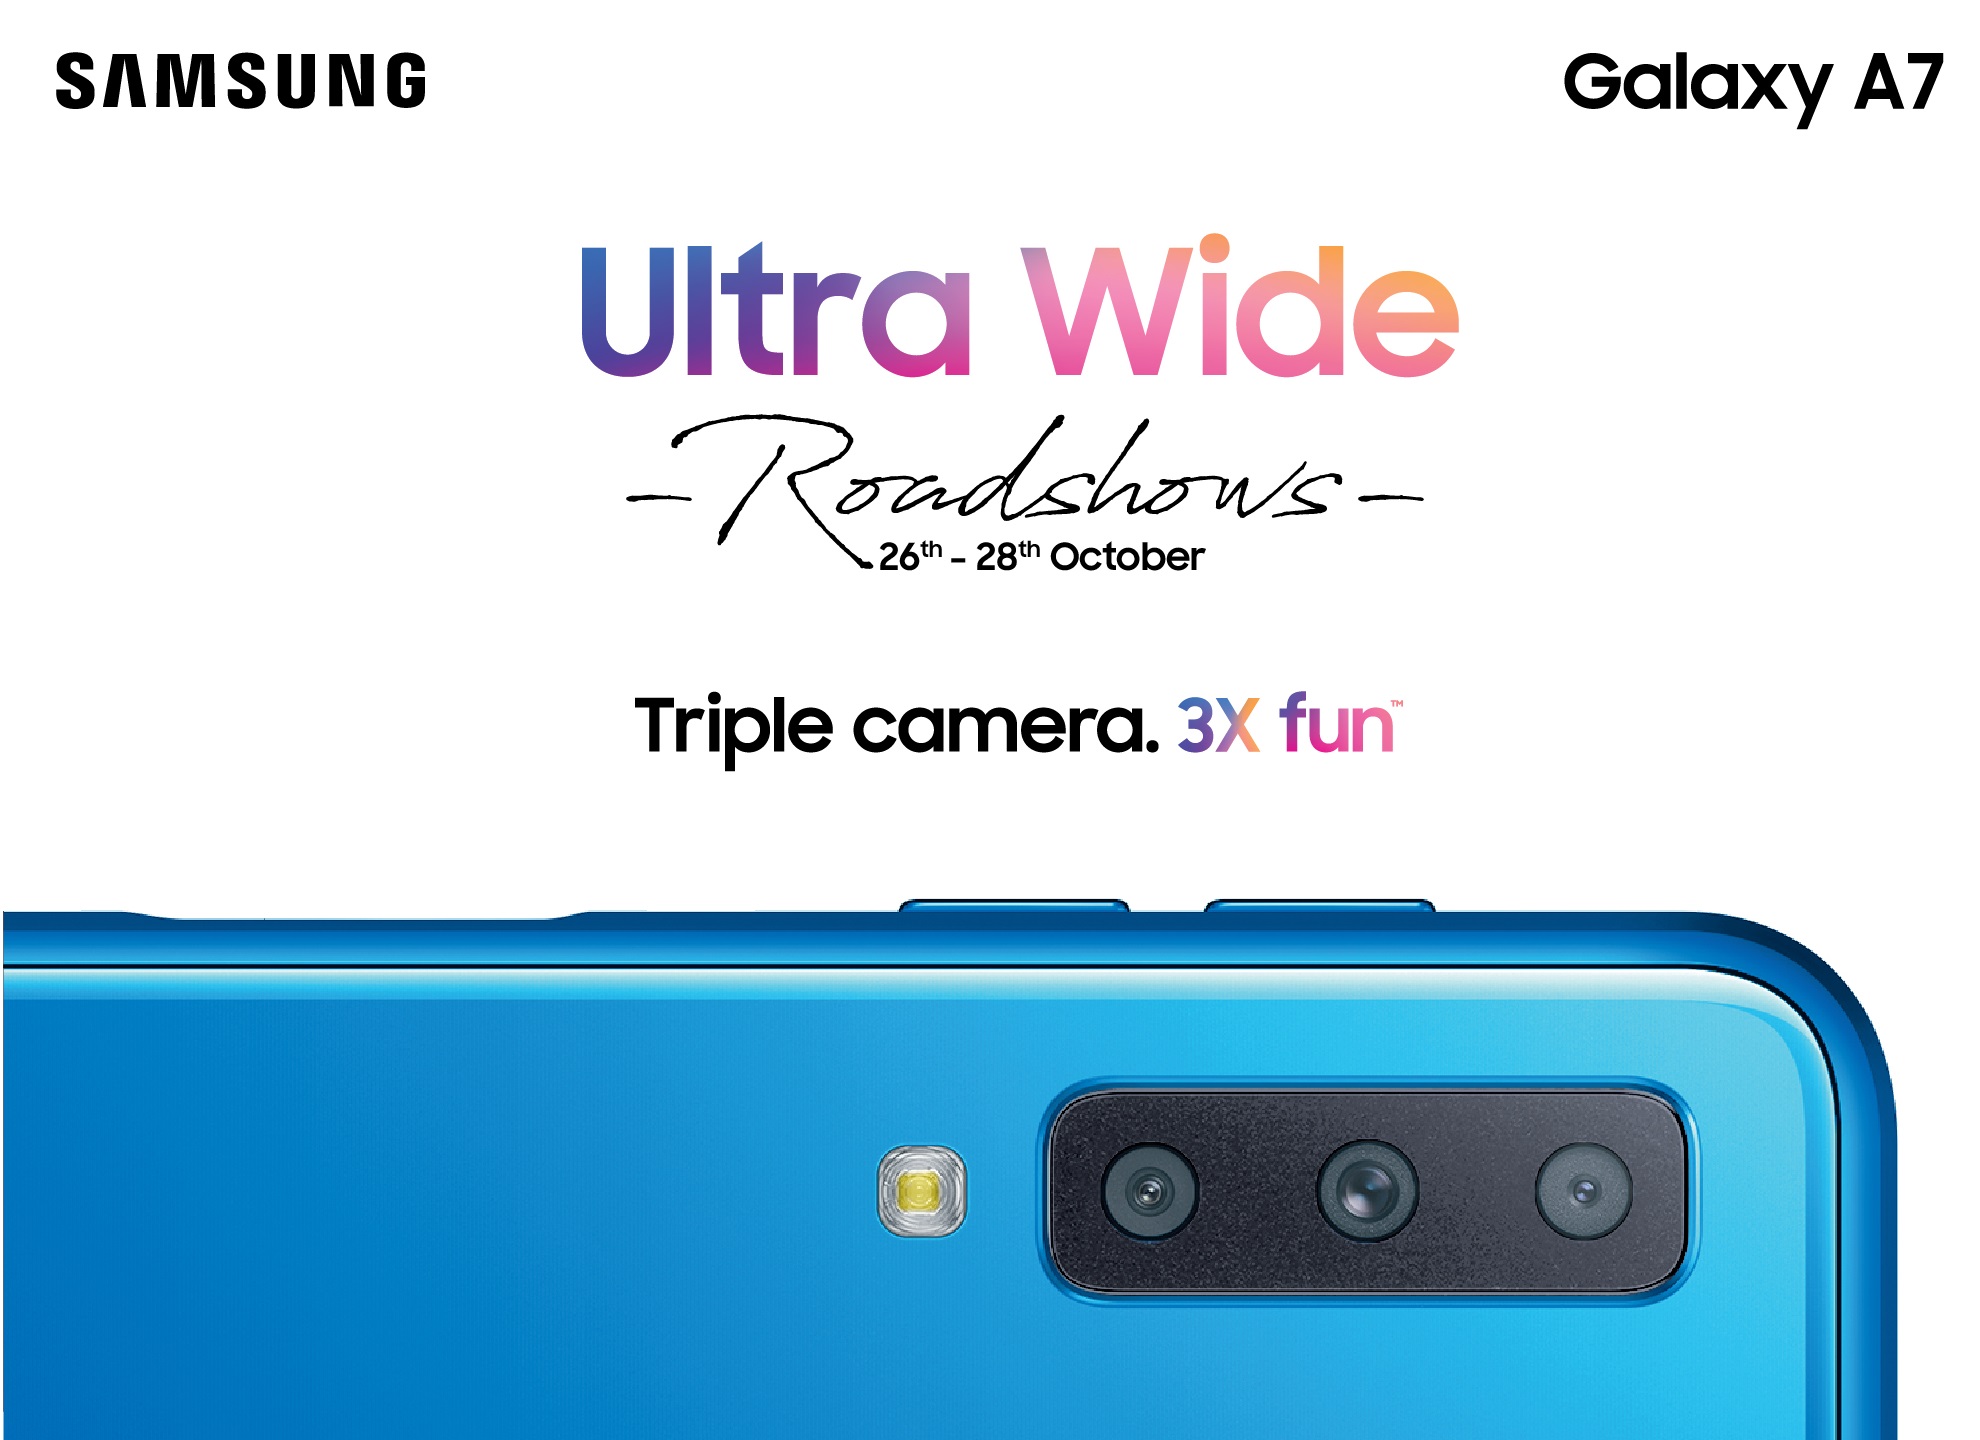 Samsung Malaysia holding multiple Samsung Galaxy A7 (2018) roadshows from 26 - 28 October 2018